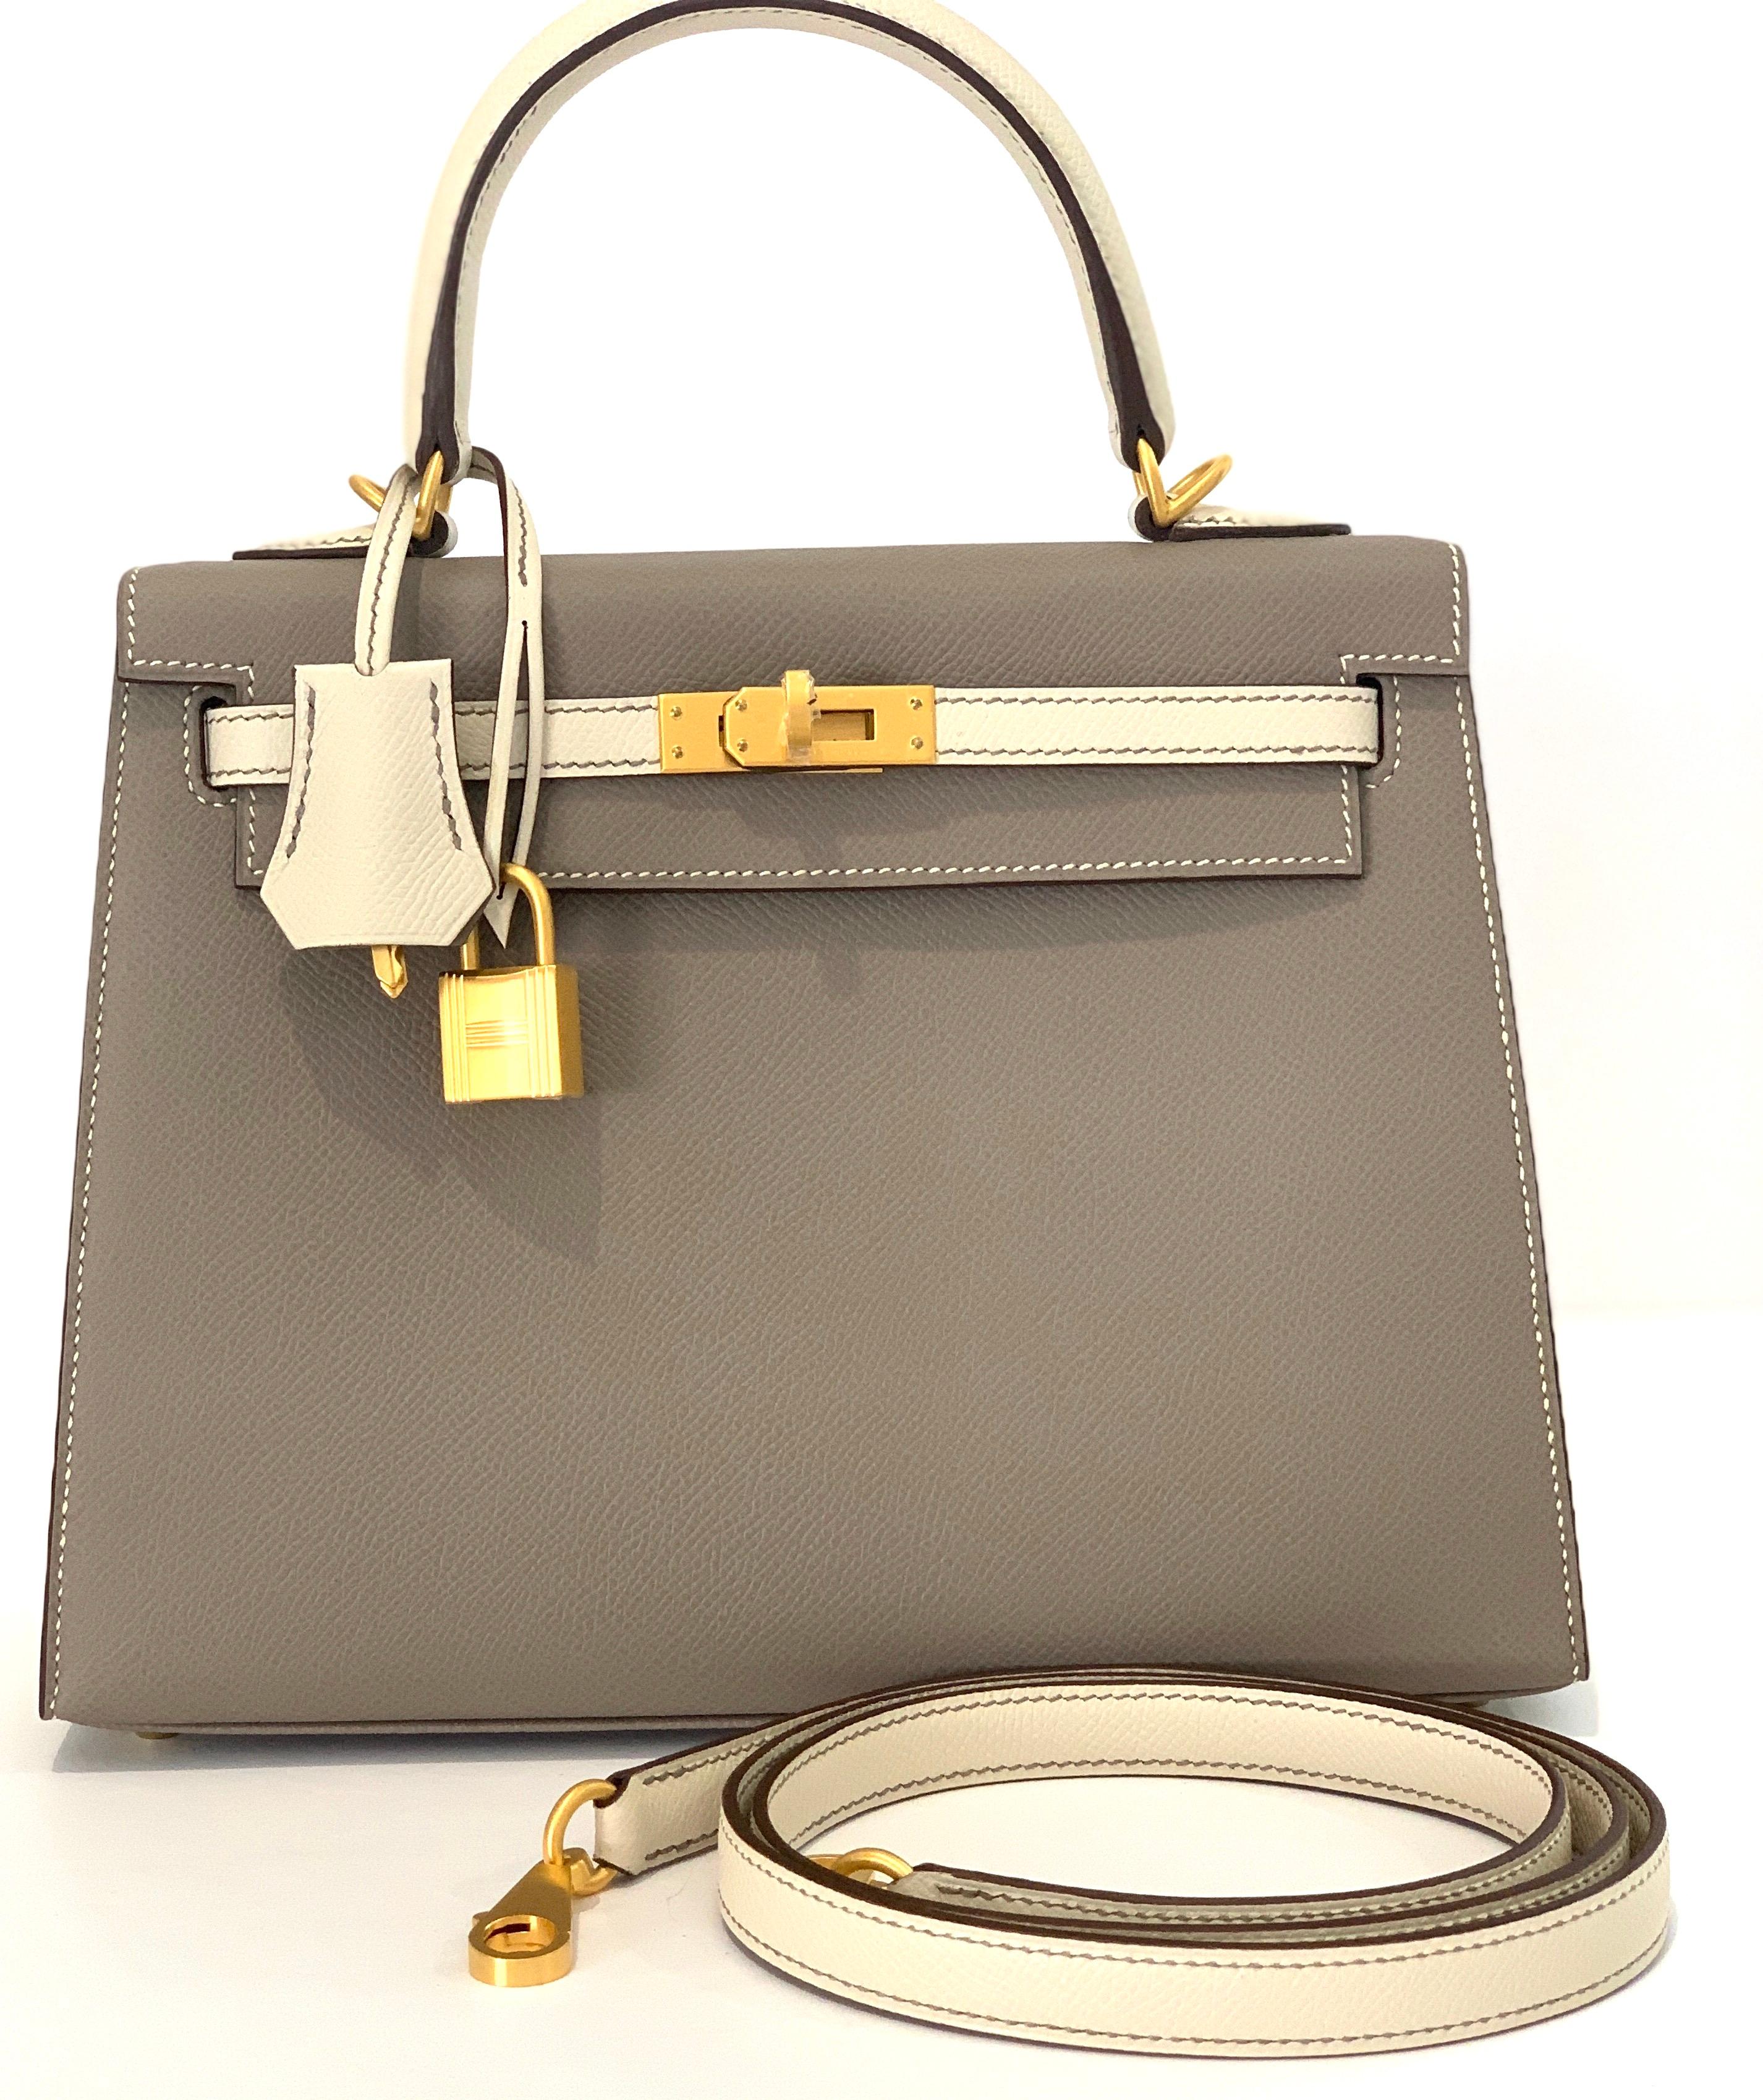 Hermes 25cm Kelly
Hermes Kelly 25cm

Special order
Gris Asphalte  and Craie
Contrasting topstitching detail
Brushed Gold Hardware
A perfect neutral Kelly

Epsom sellier 
Plastic on the hardware

Accompanied by: Hermes box, Hermes dustbag, clochette,